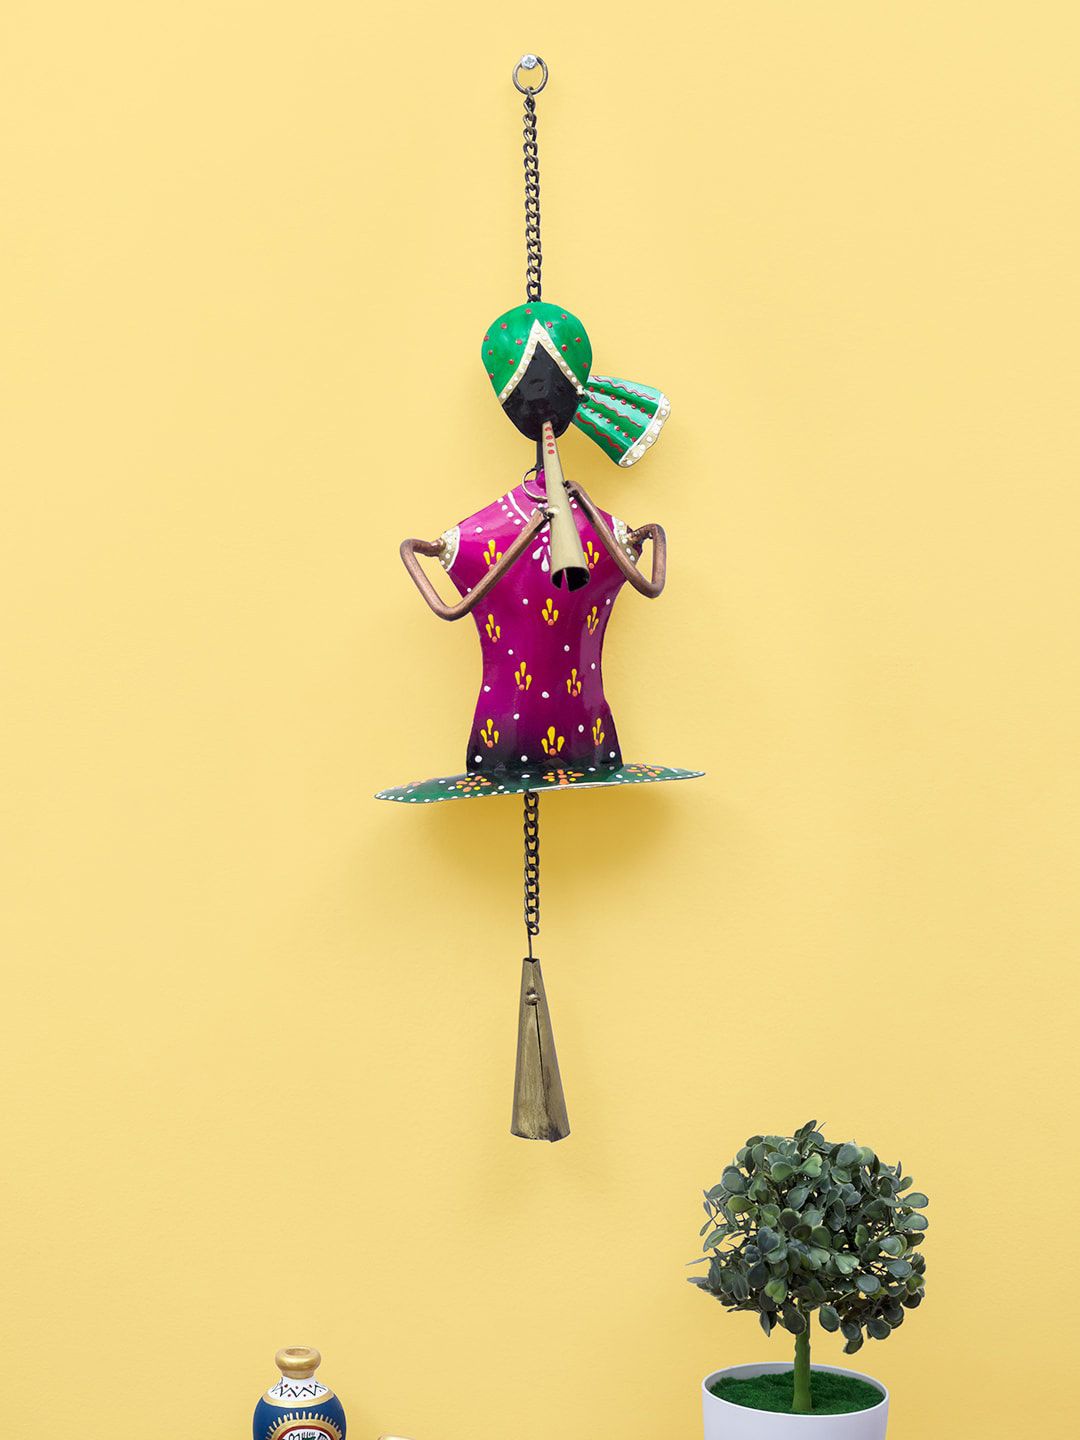 Golden Peacock Pink & Green Rajasthani Turban Musician Bells Hanging Wall Decor Price in India